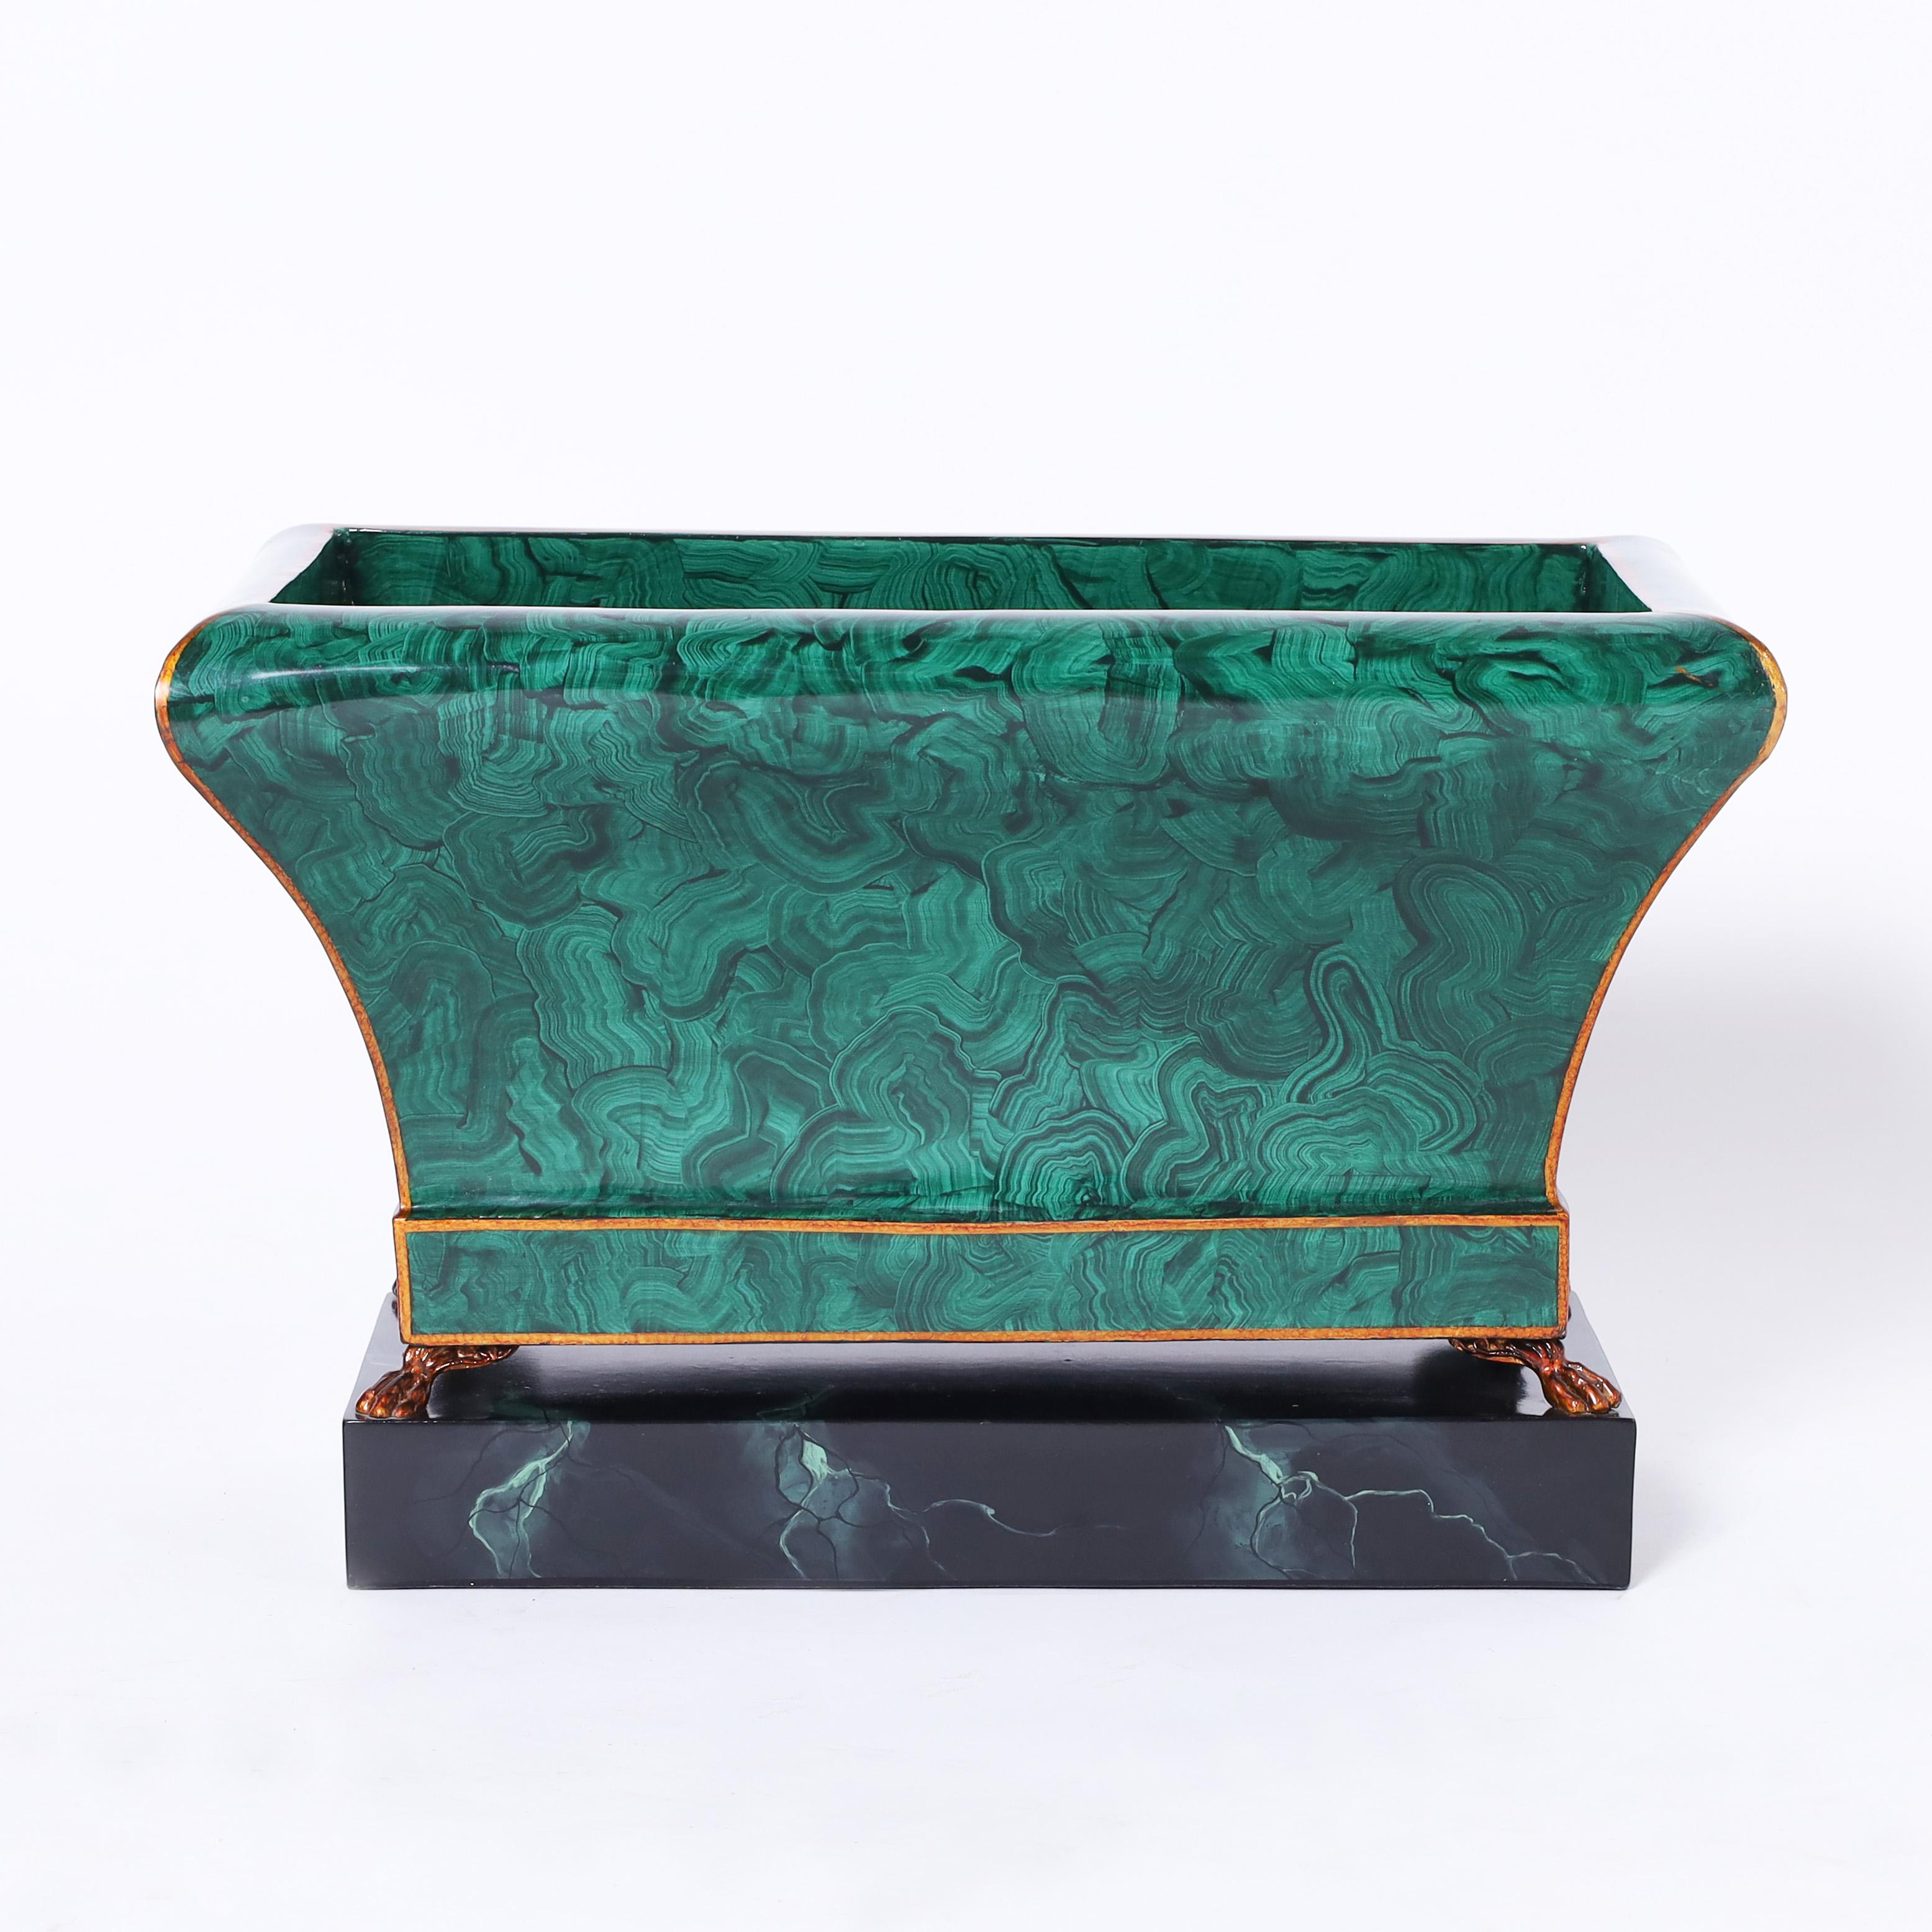 Chic vintage classical jardiniere handcrafted in metal with a faux malachite finish on four paw feet over a faux marble tole plinth. Signed Maitland Smith on the bottom.